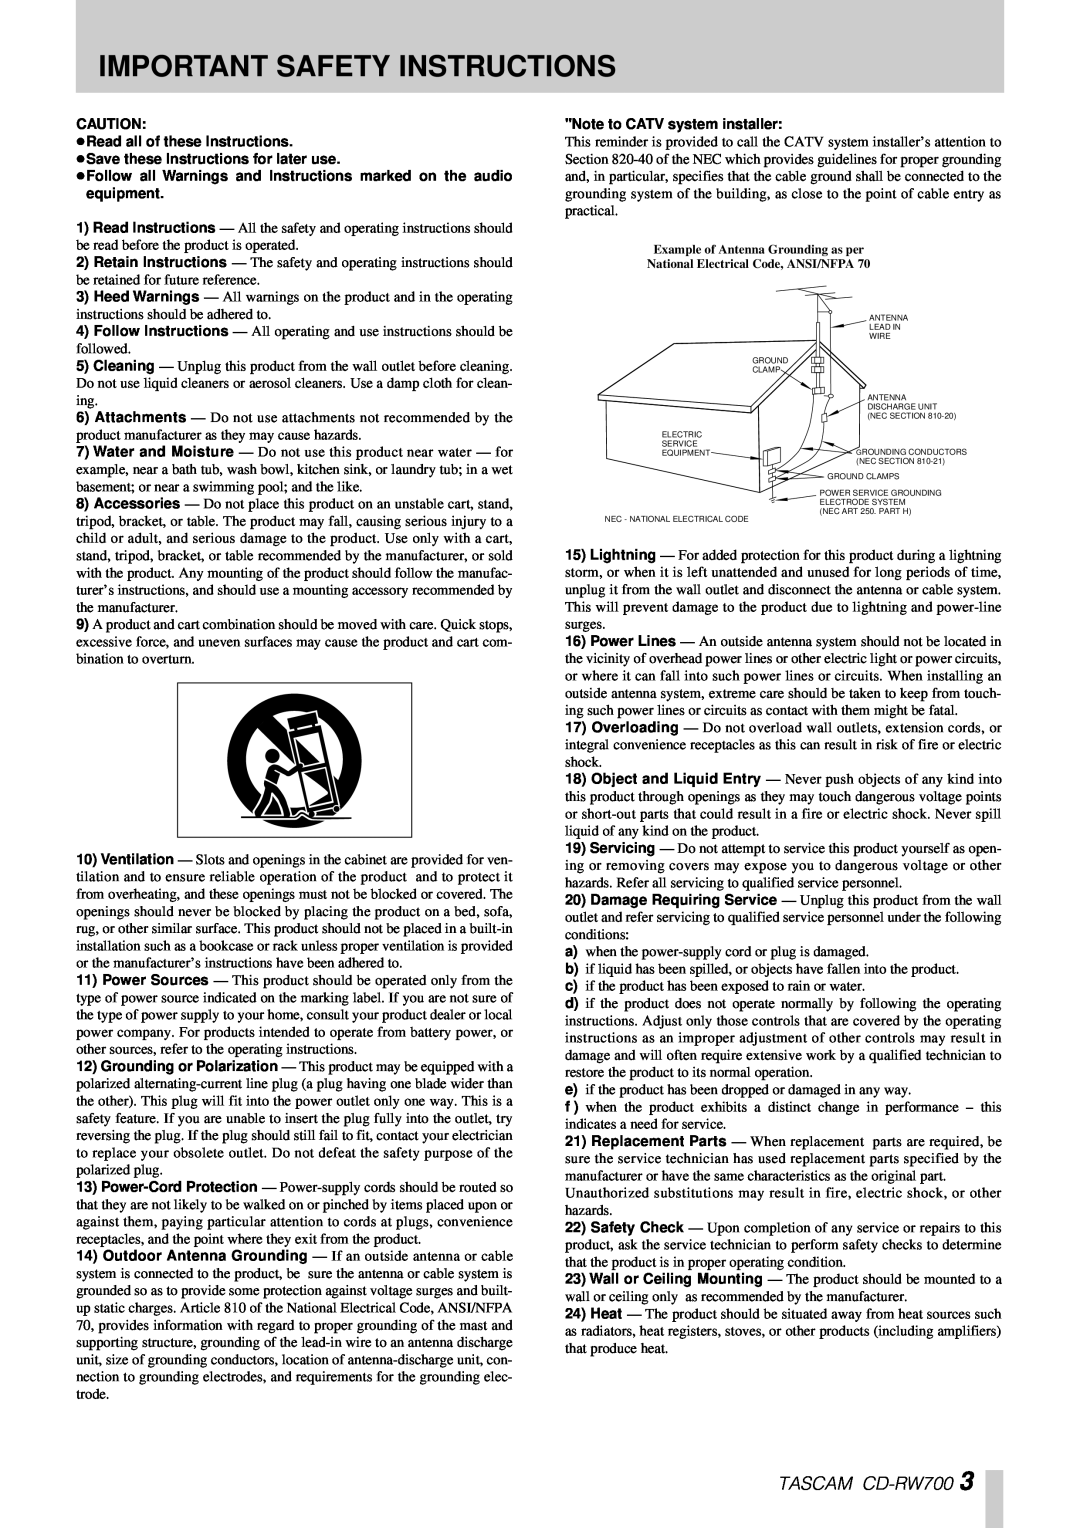 Tascam owner manual Important Safety Instructions, TASCAM CD-RW700 